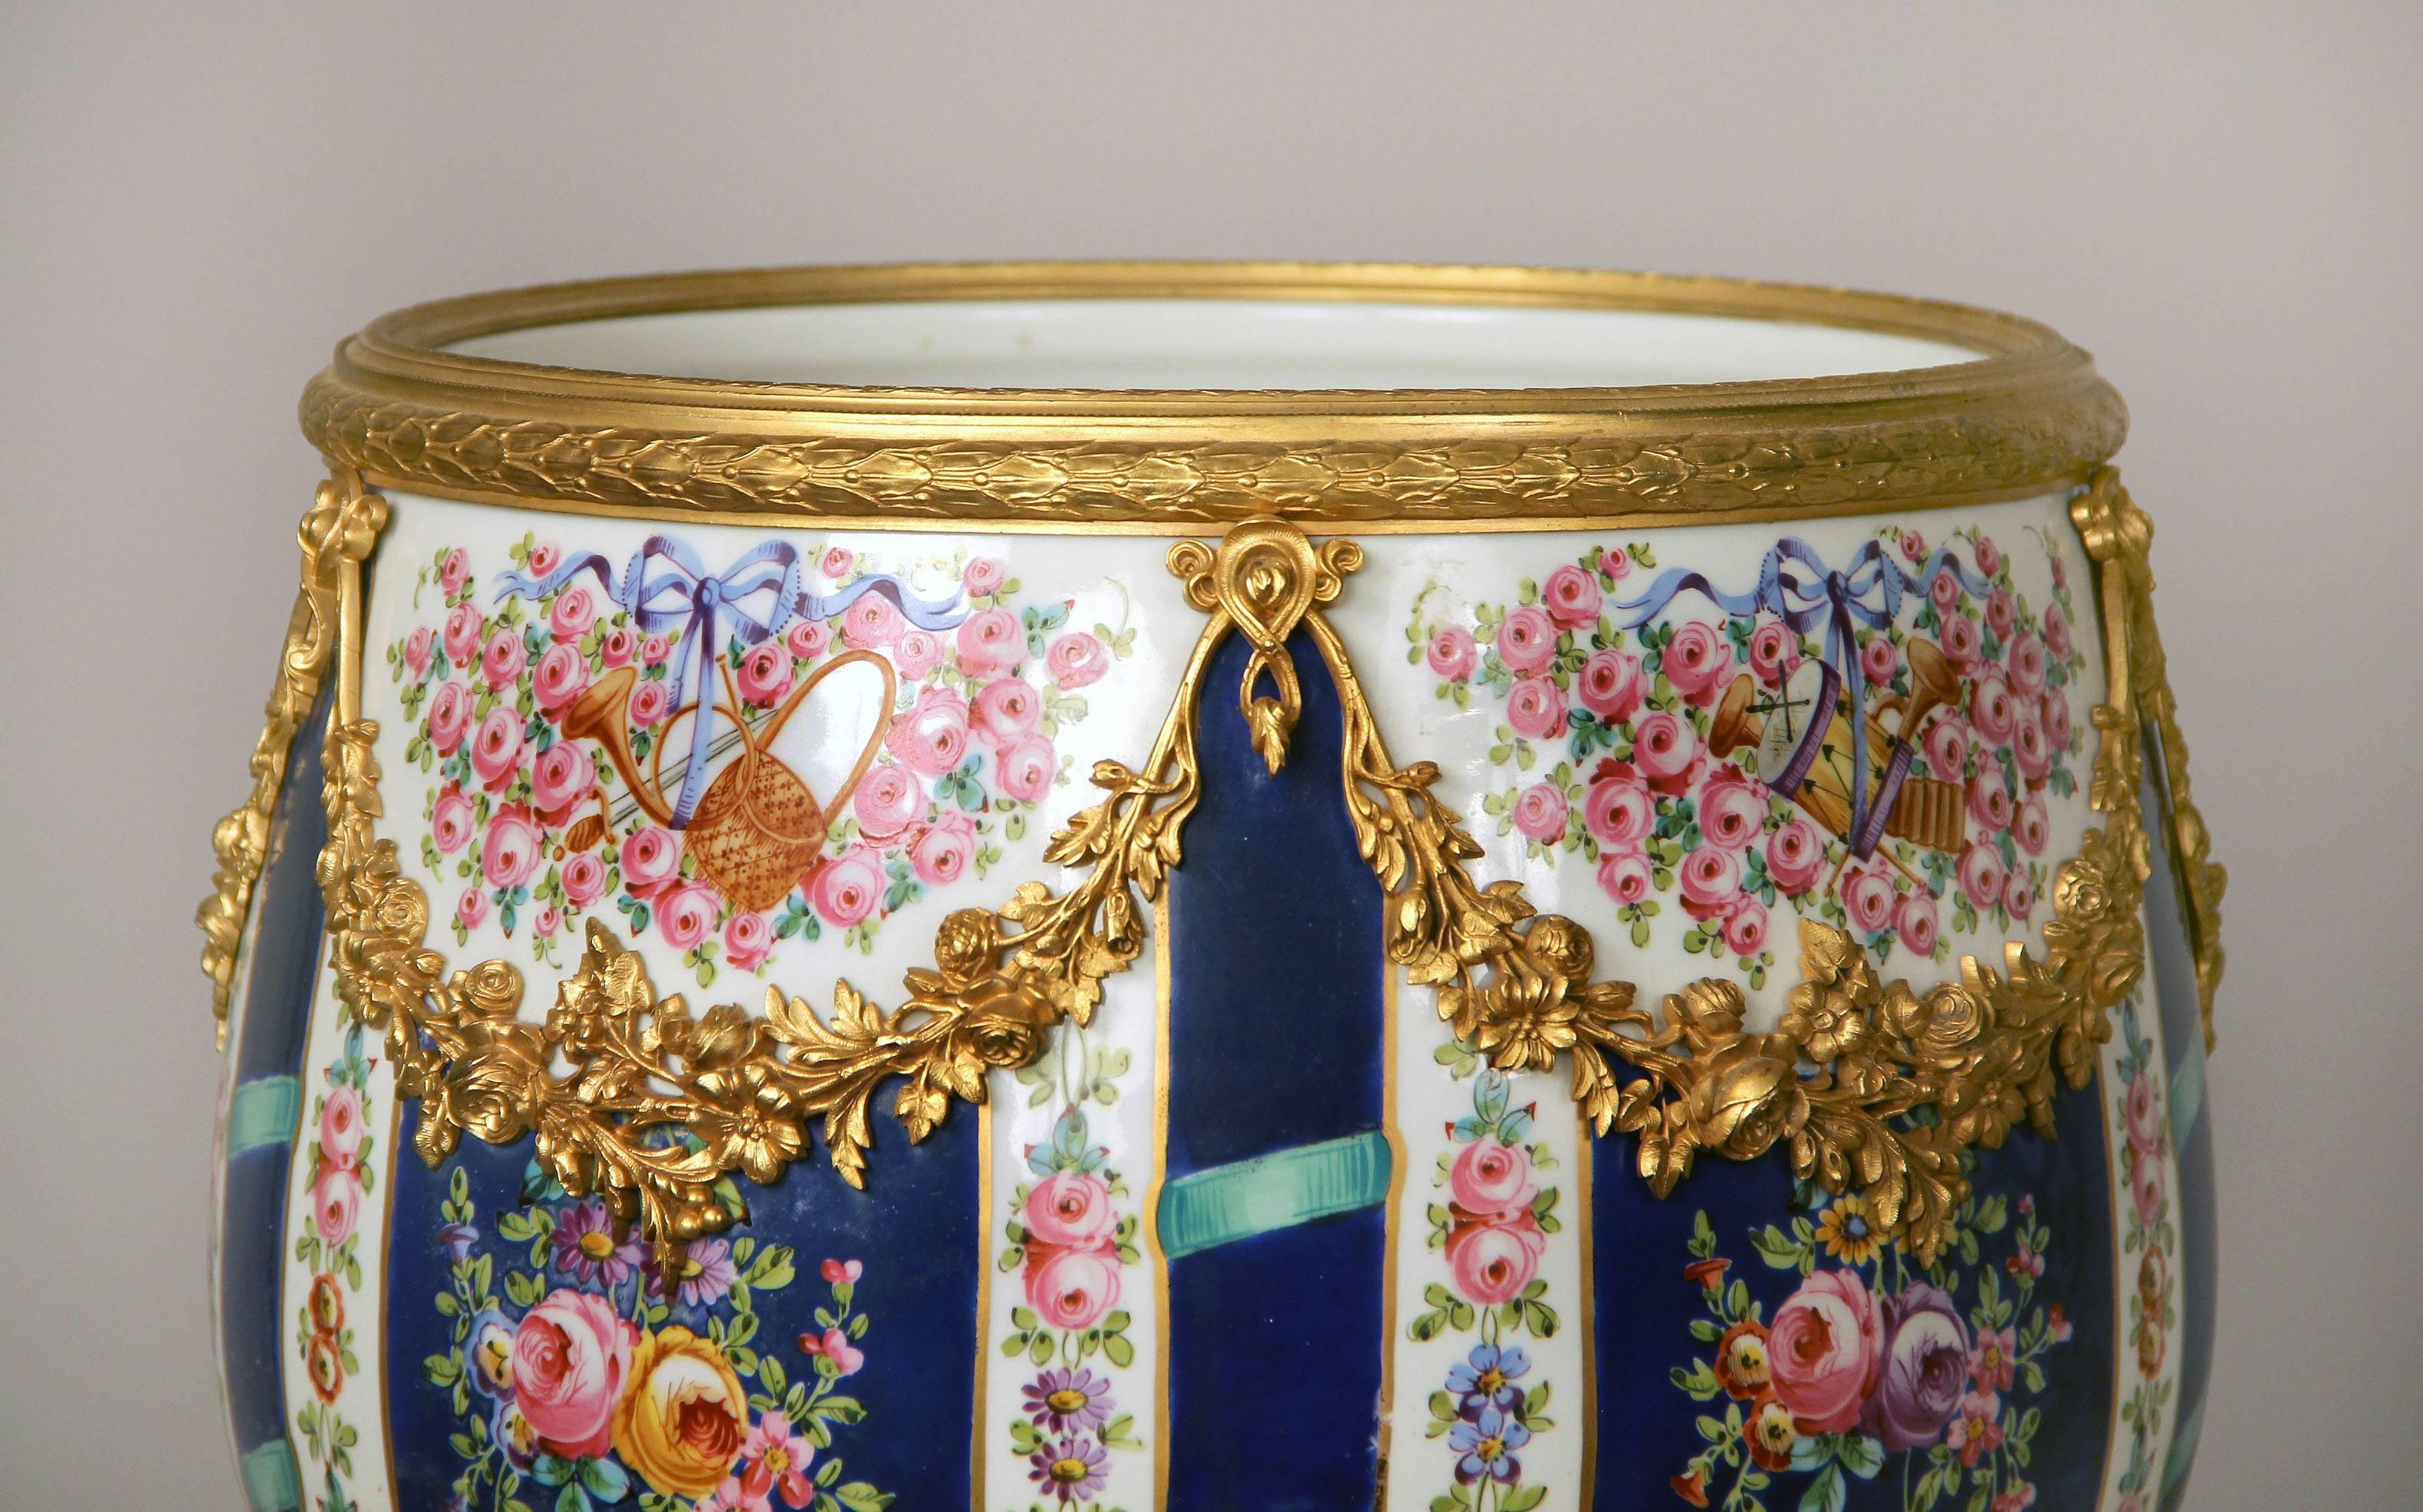 A fine late 19th century gilt bronze-mounted Sèvres style parcel-gilt porcelain jardinière

Finely painted with instruments, trophies and roses, mounted by bronze flowers and garlands.

In late 1739-early 1740 the Sèvres Porcelain Factory opened